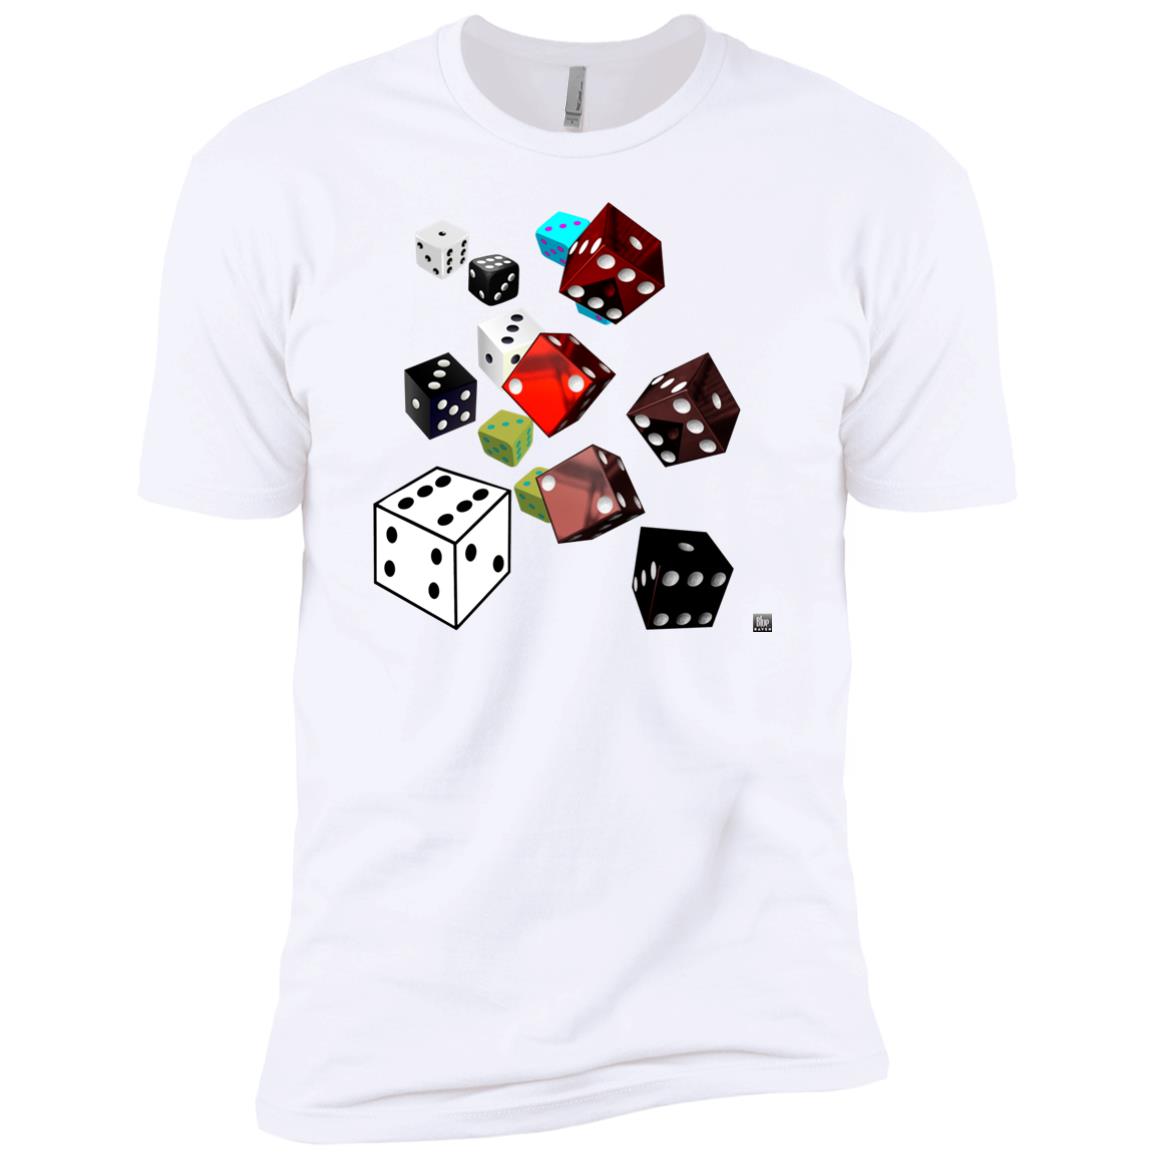 roll of the dice - Men's Premium Fitted T-Shirt